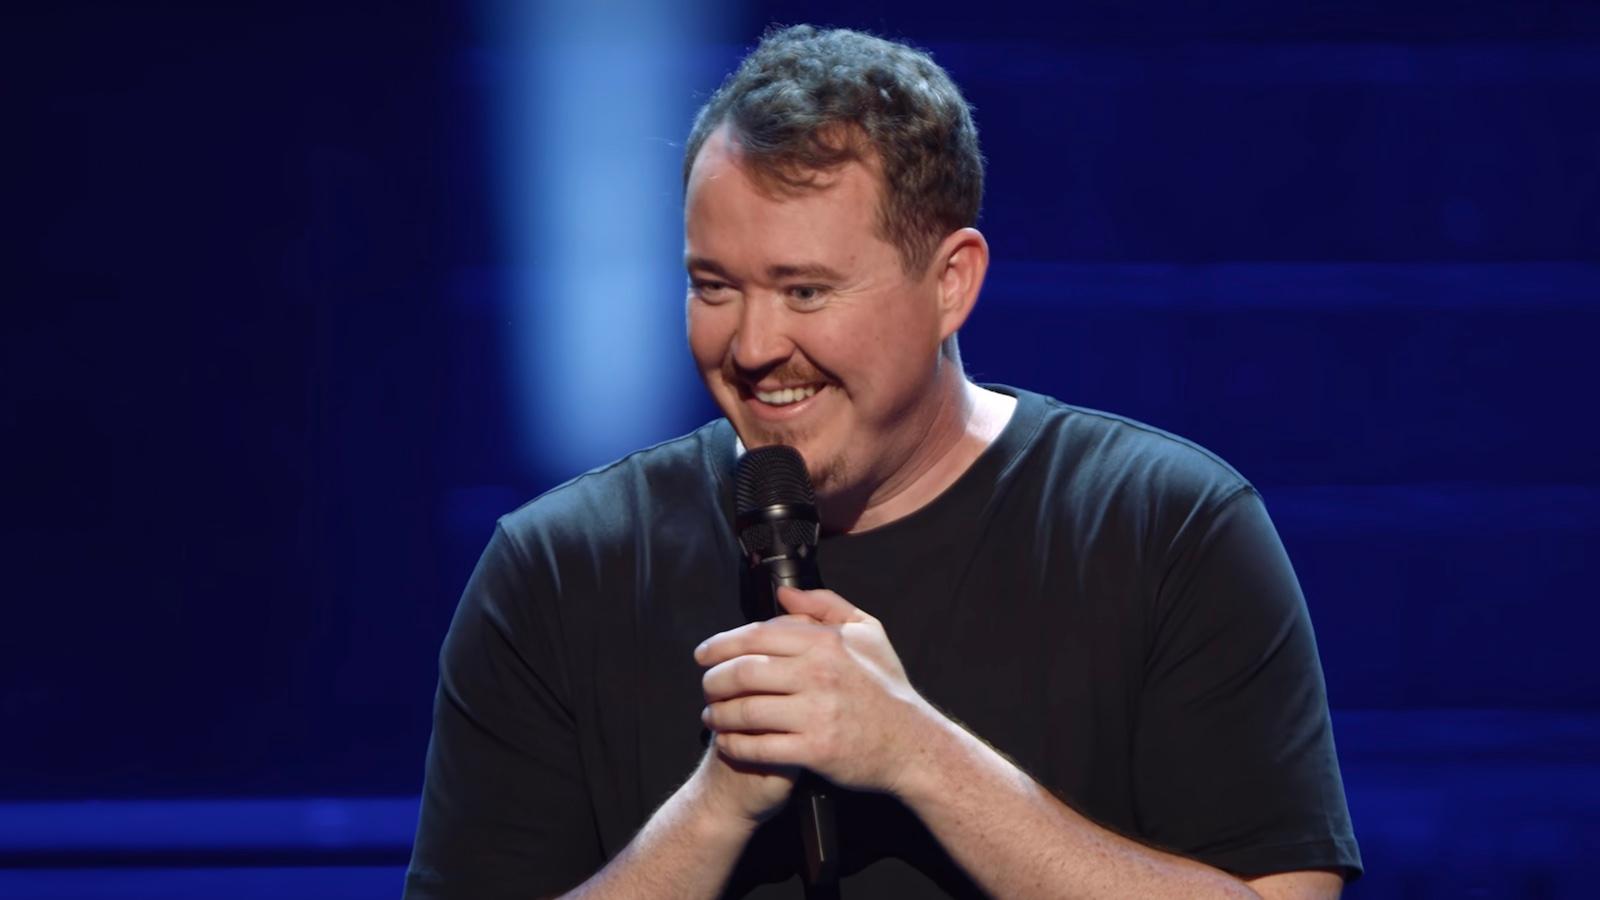 What Is Comedian Shane Gillis Religion And Ethnicity?